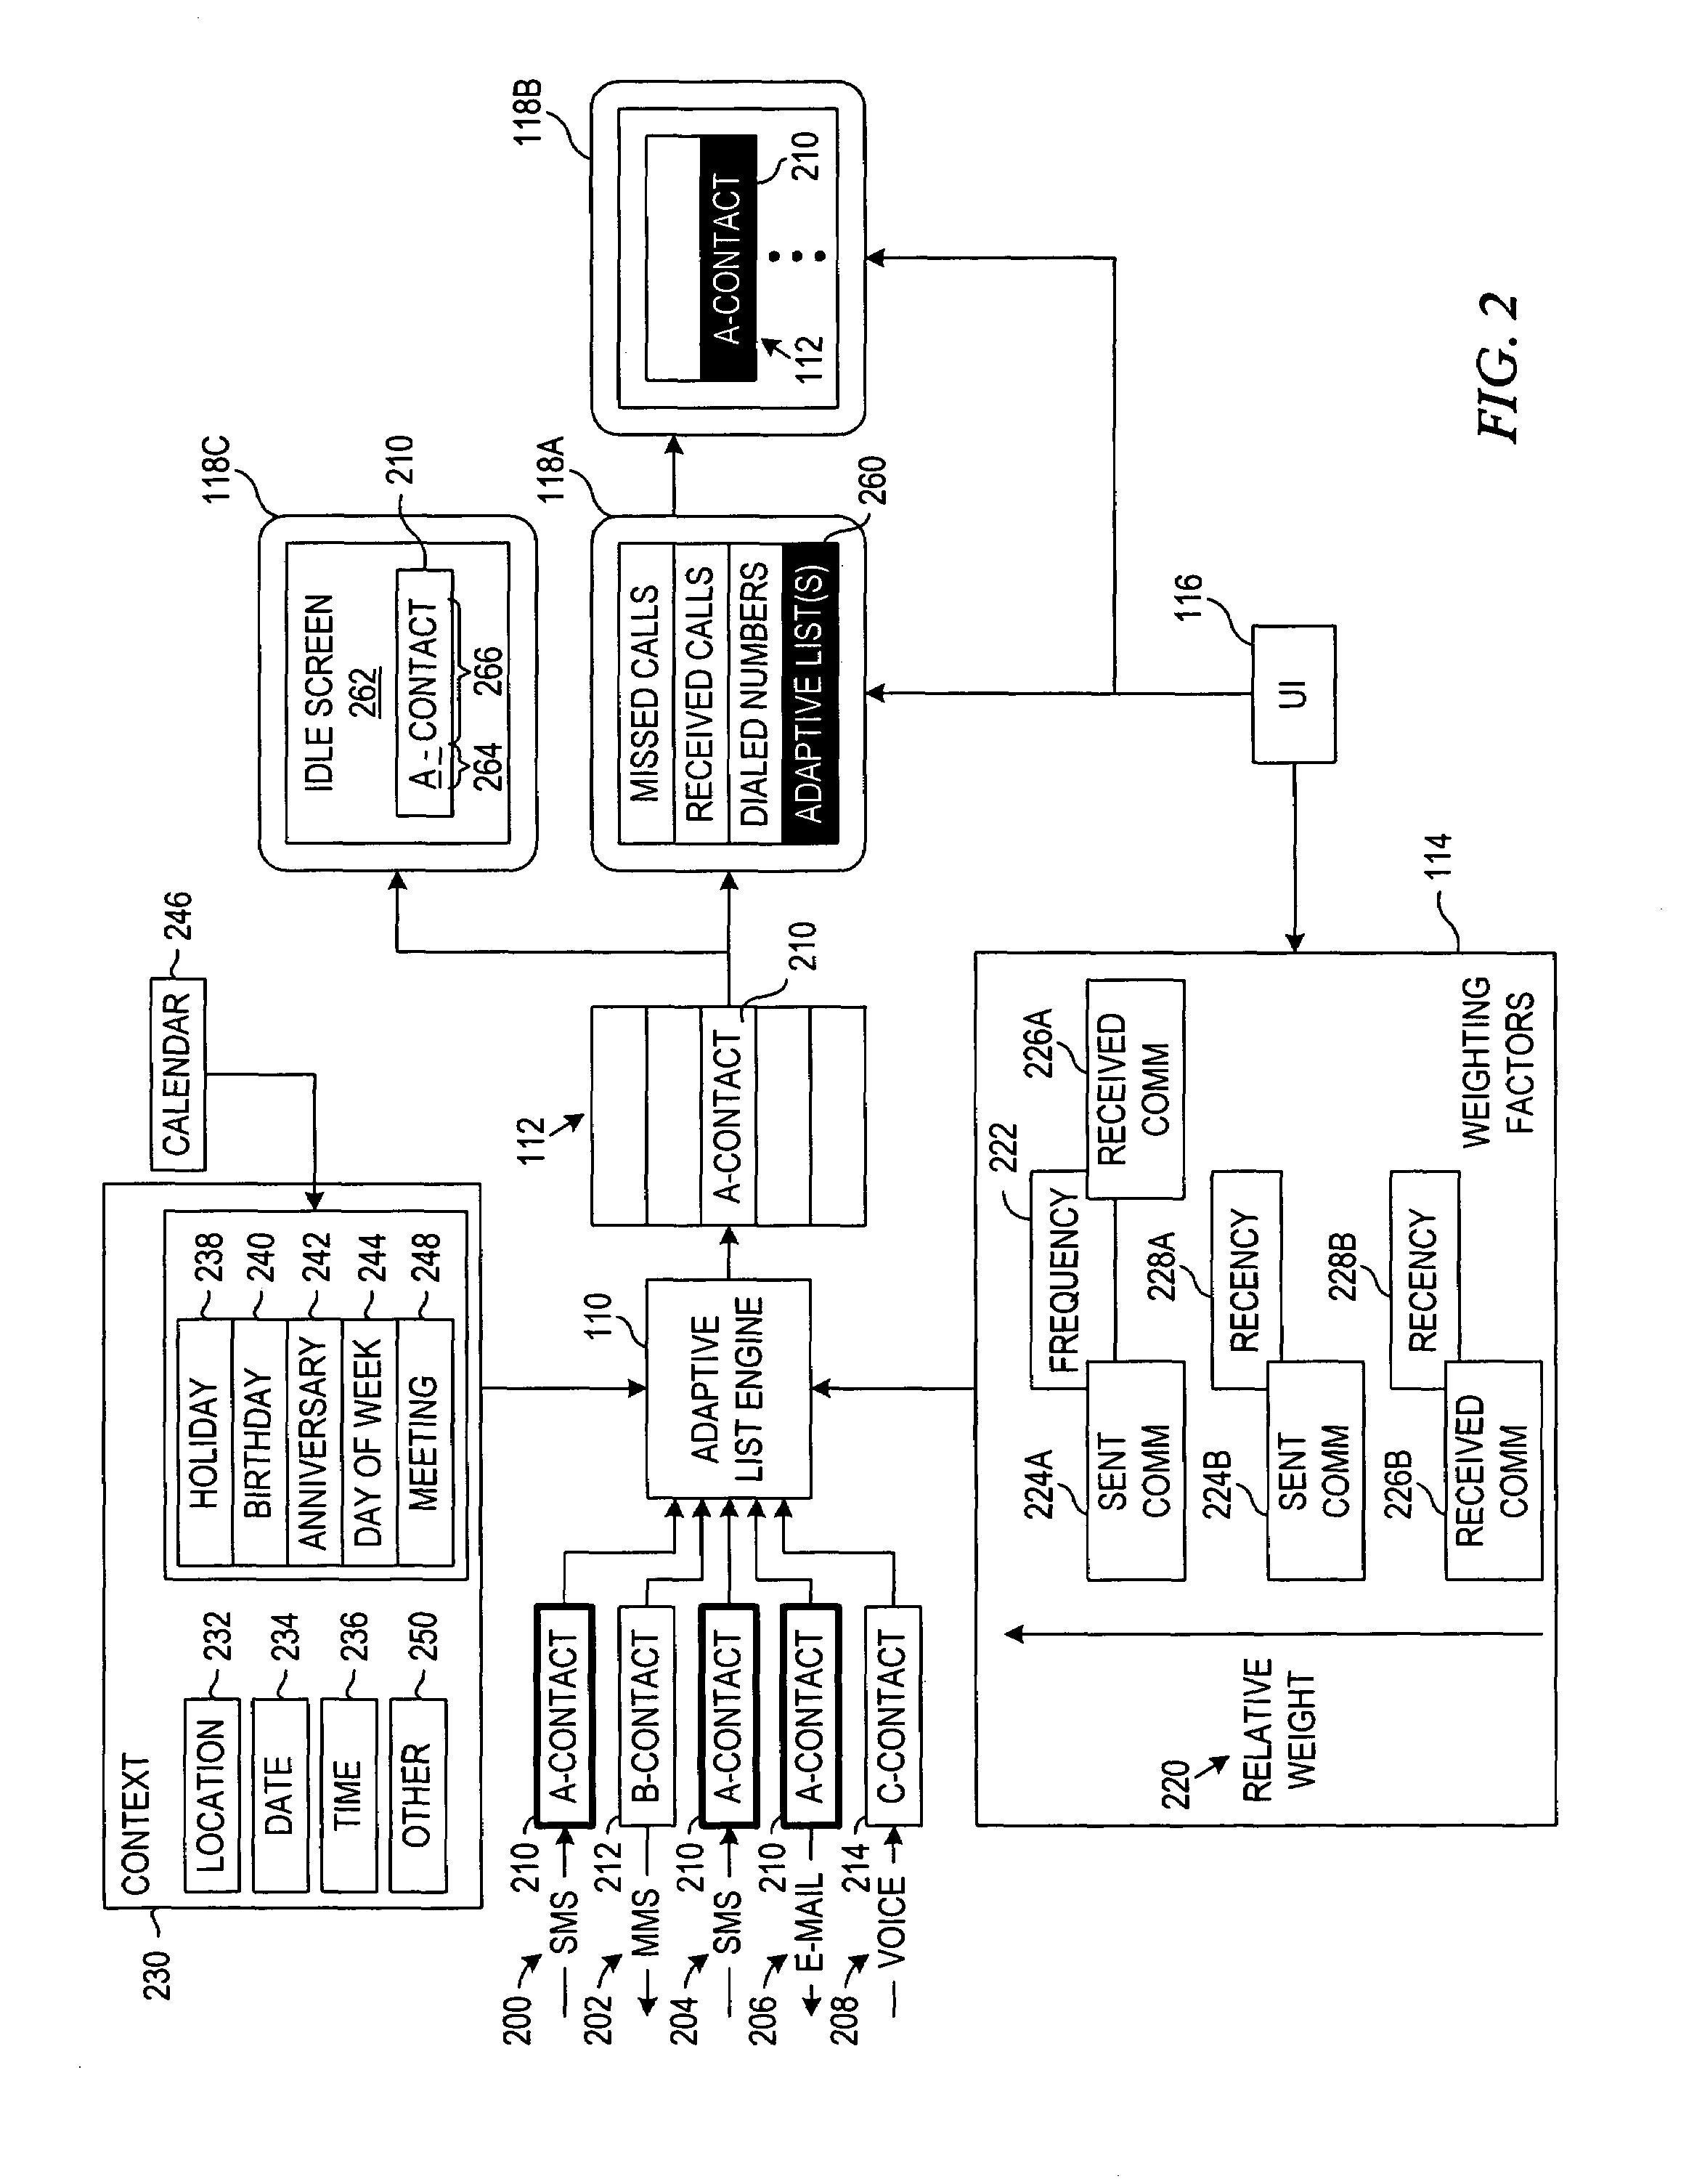 Apparatus and method for facilitating contact selection in communication devices